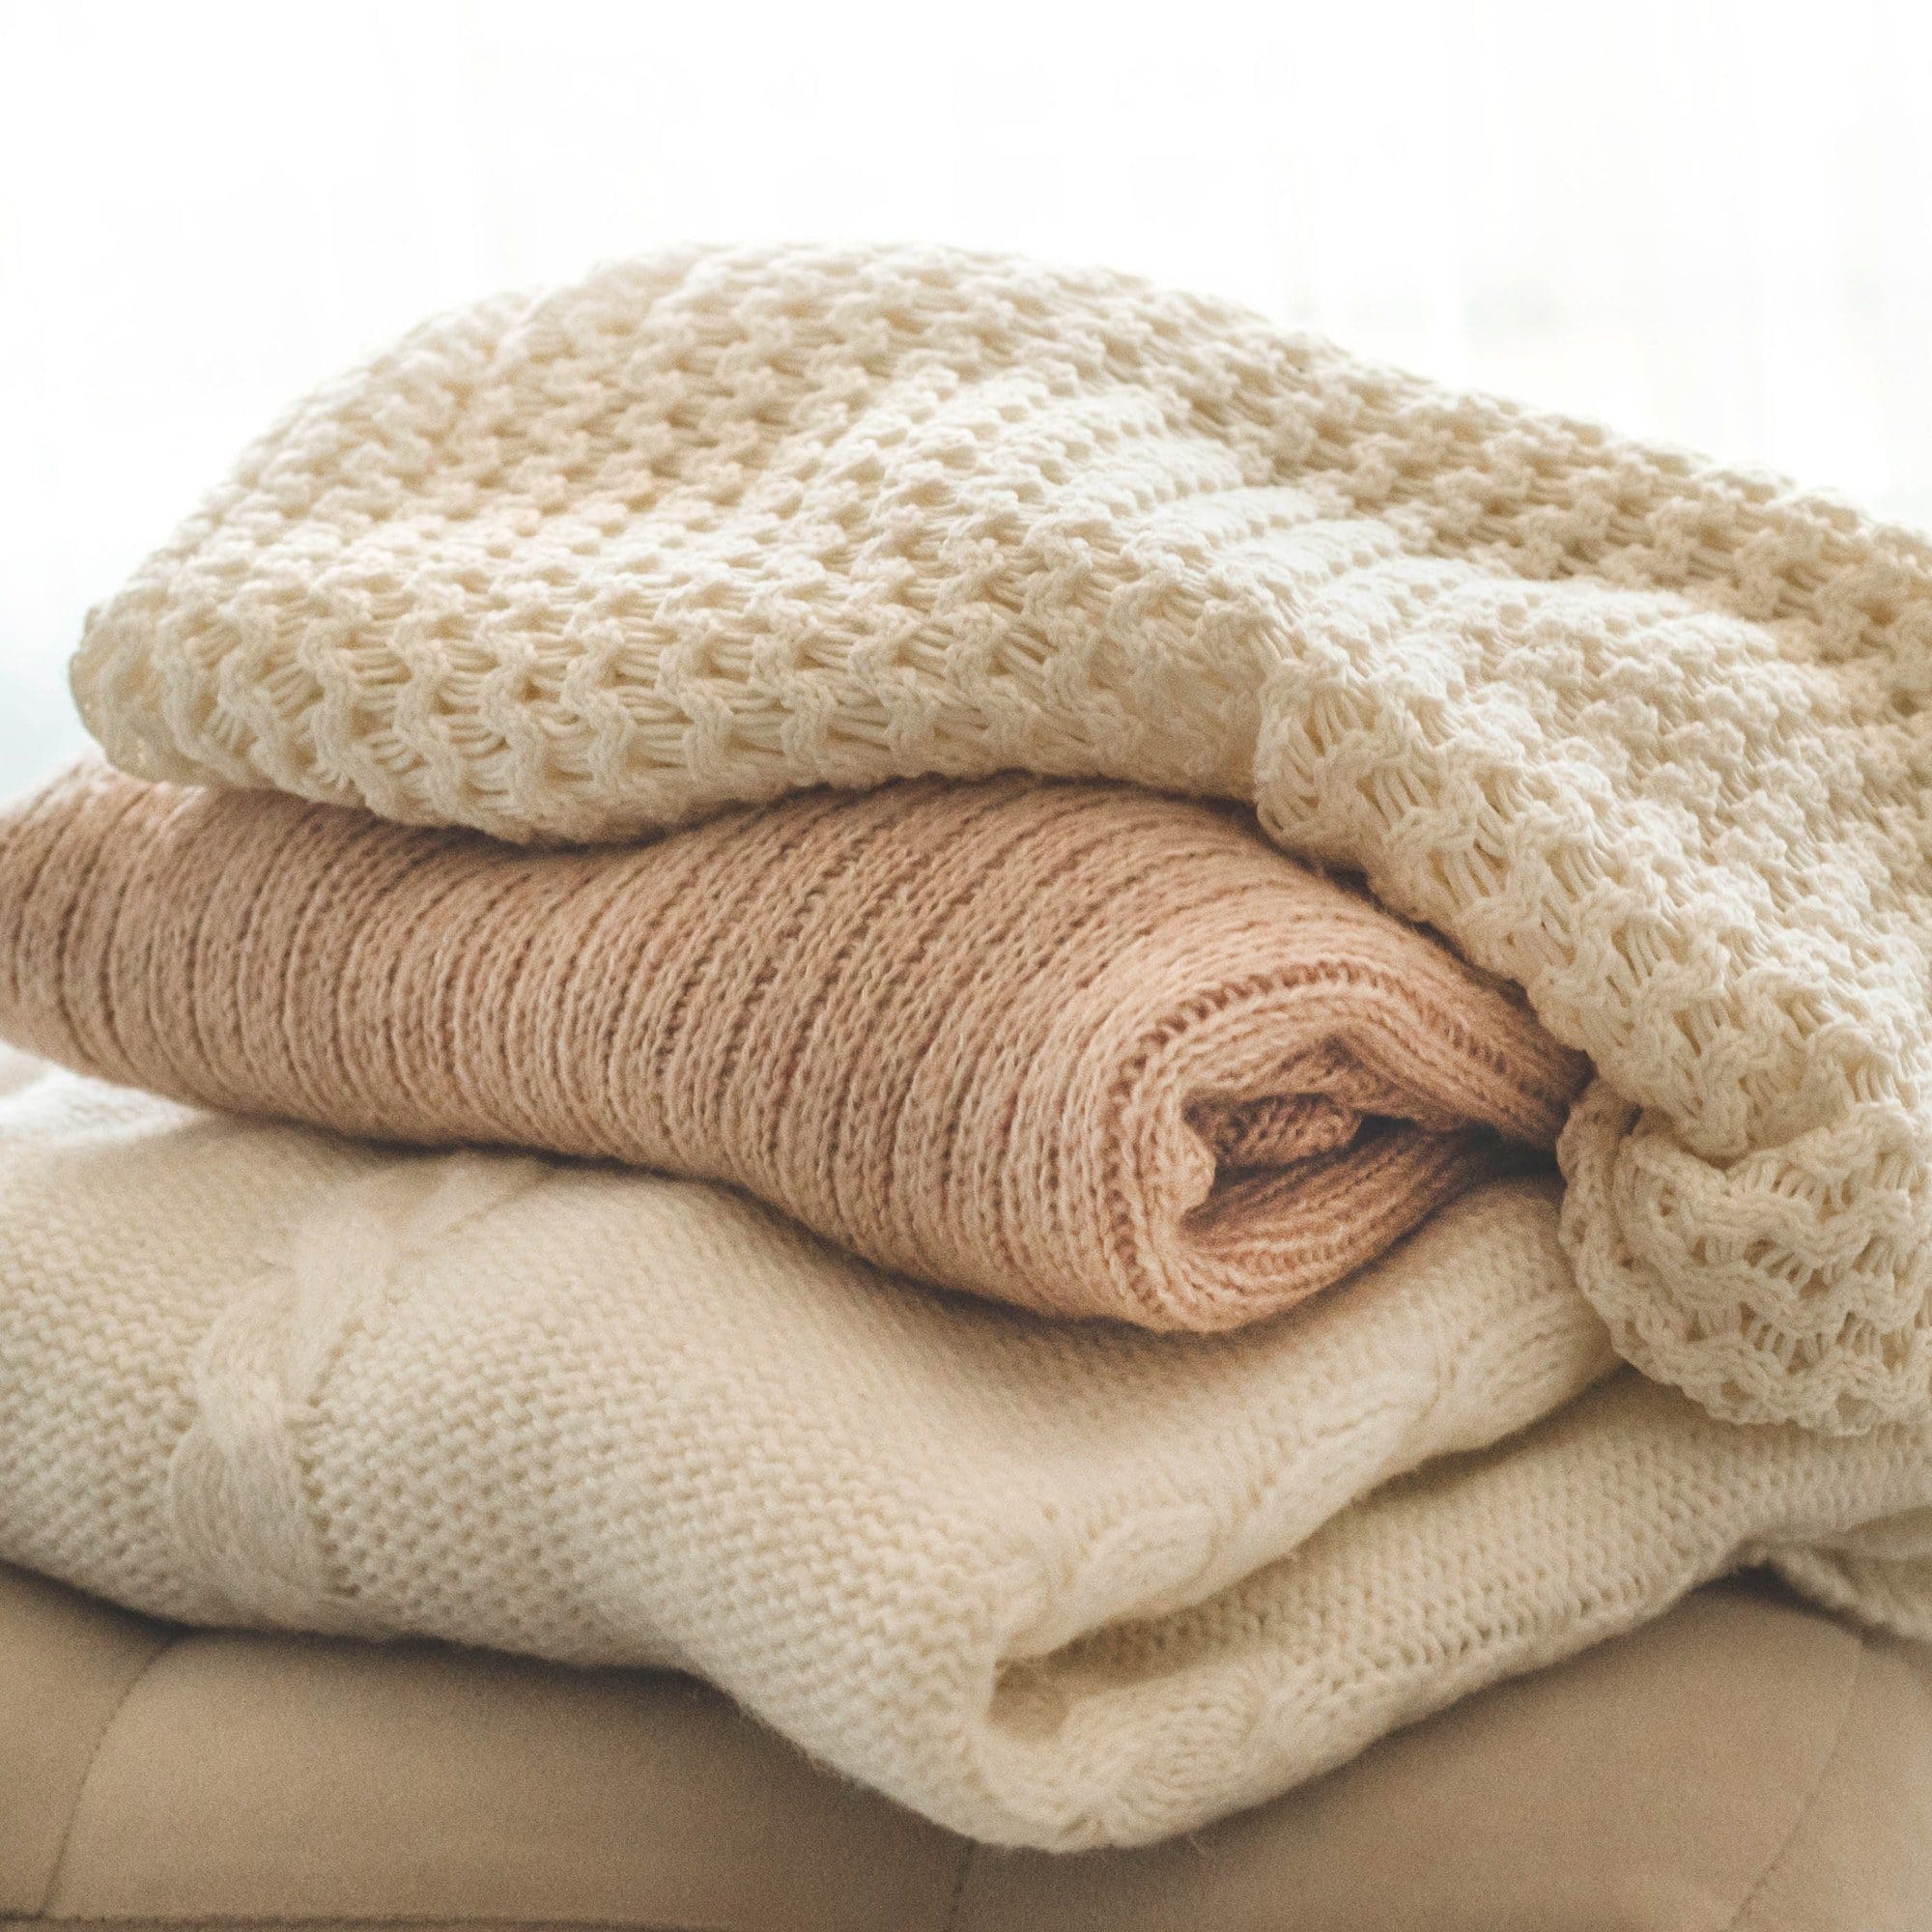 A stack of knitted sweaters in the interior of the living room